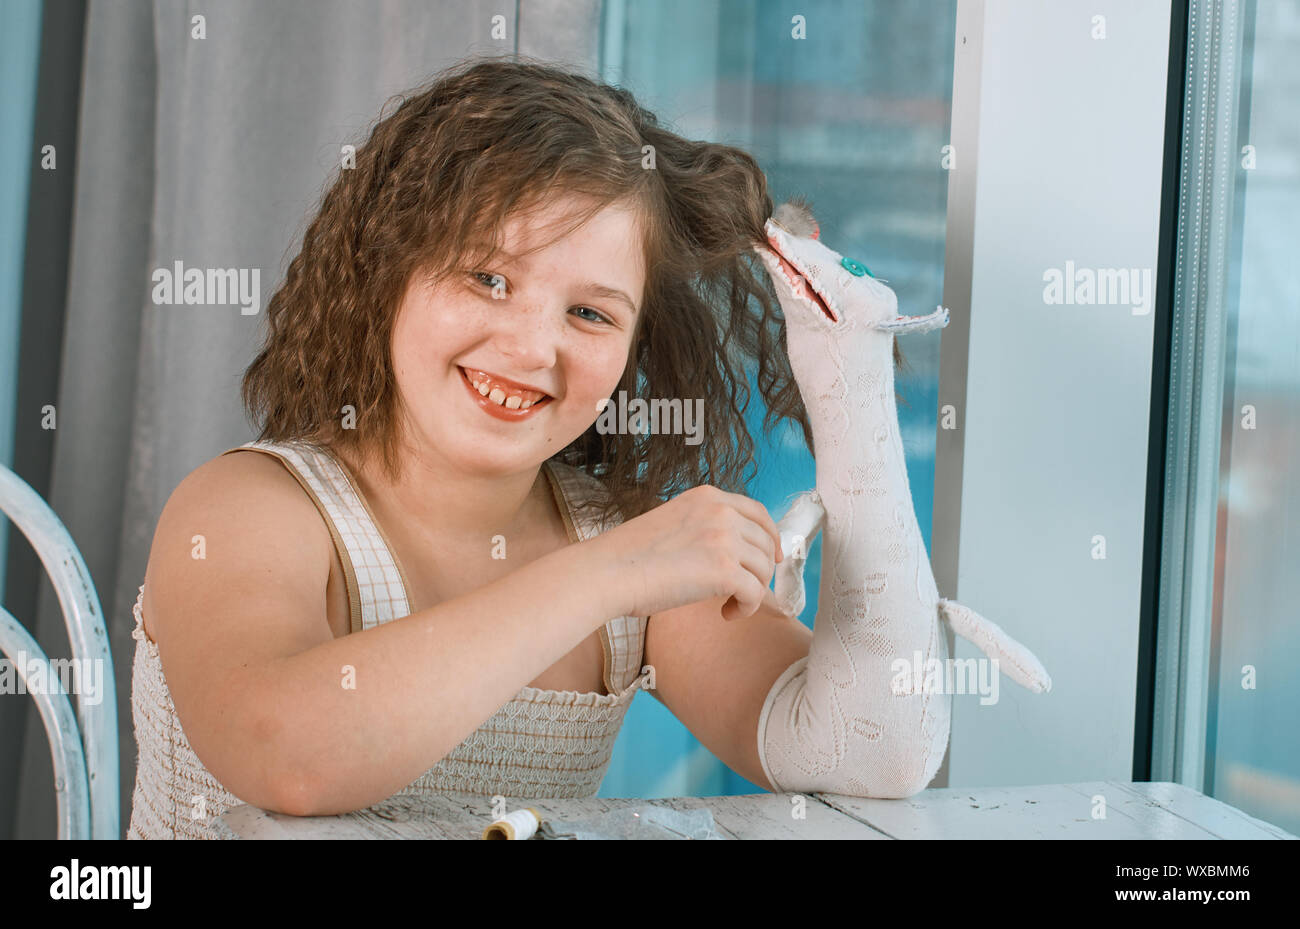 small girls with hand puppets Stock Photo